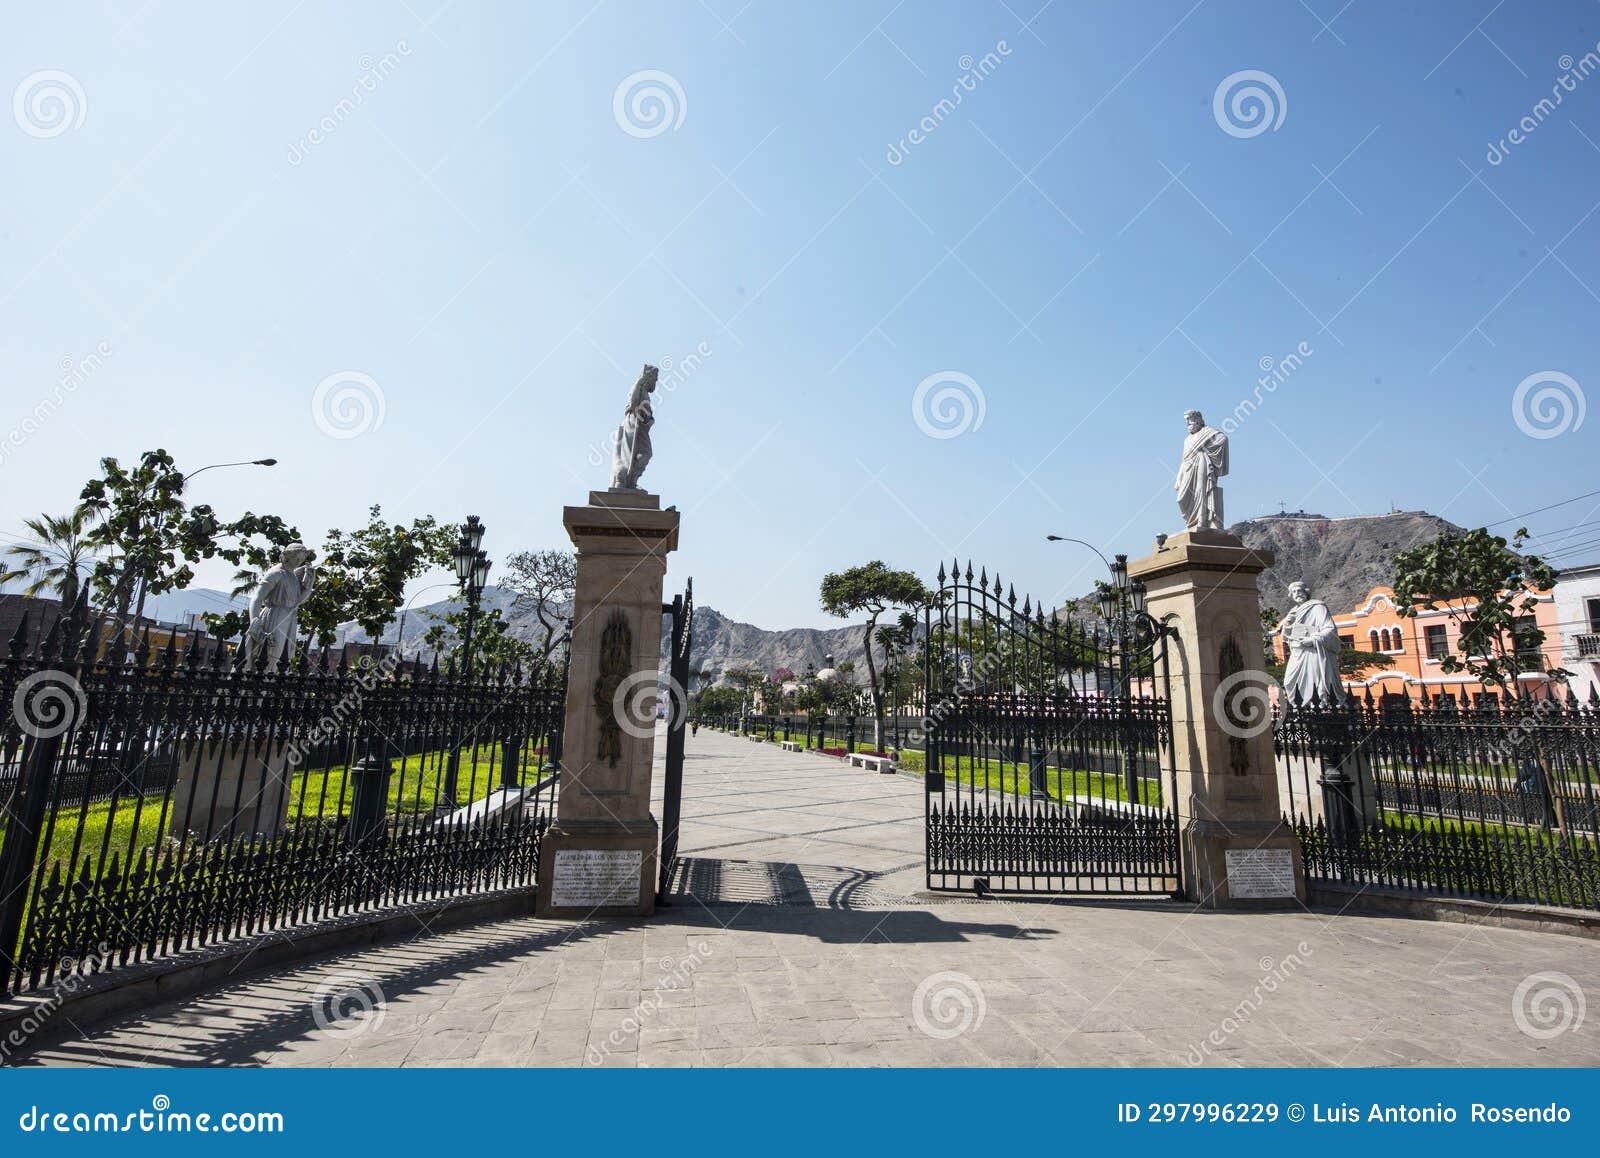 the alameda de los descalzos is an important avenue, public garden or promenade located in the rimac district in the city of lima